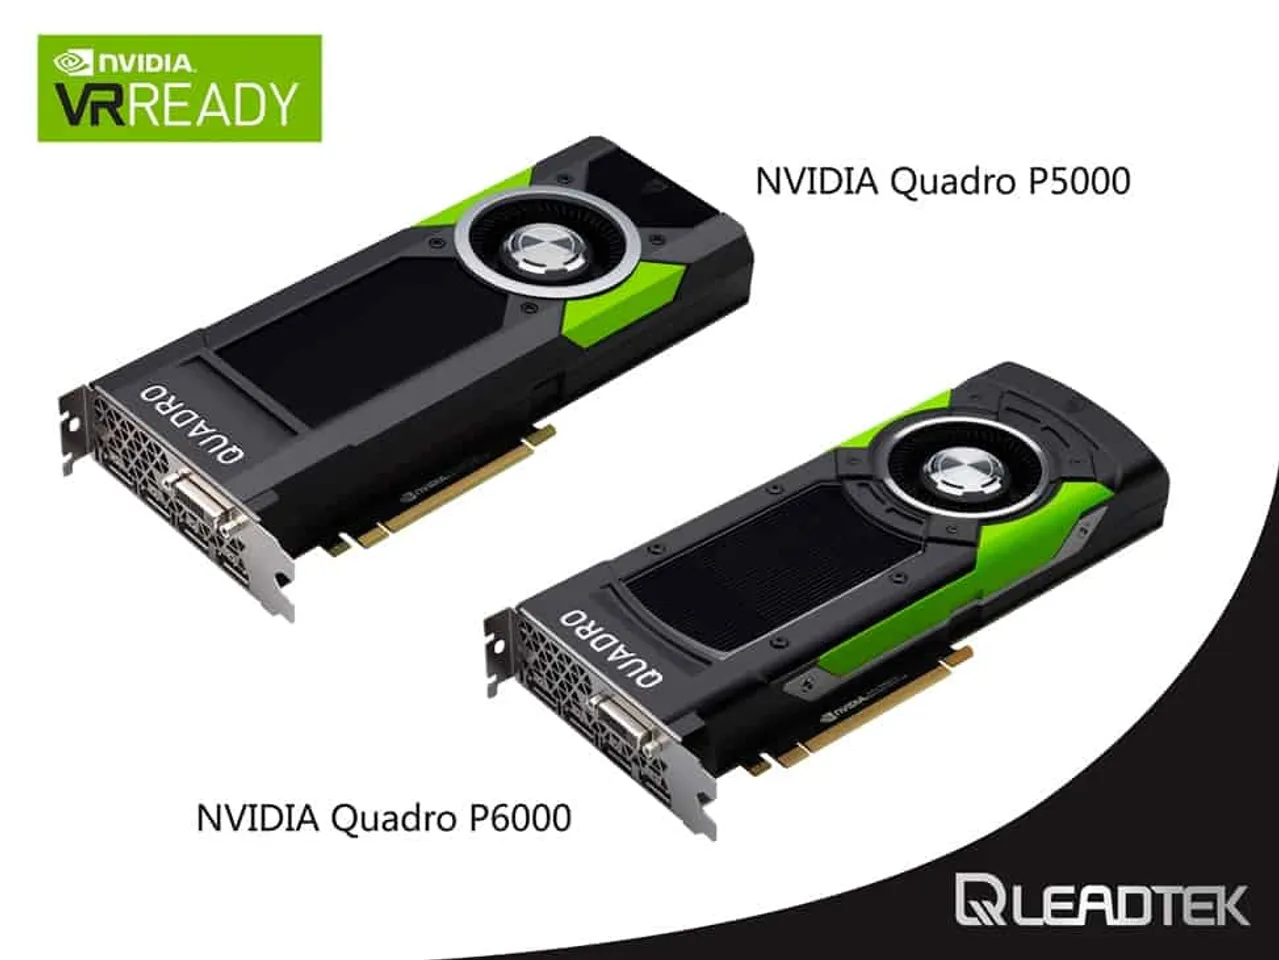 Leadtek Rolls out NVIDIA QUADRO P6000 and P5000 Professional Graphics Cards